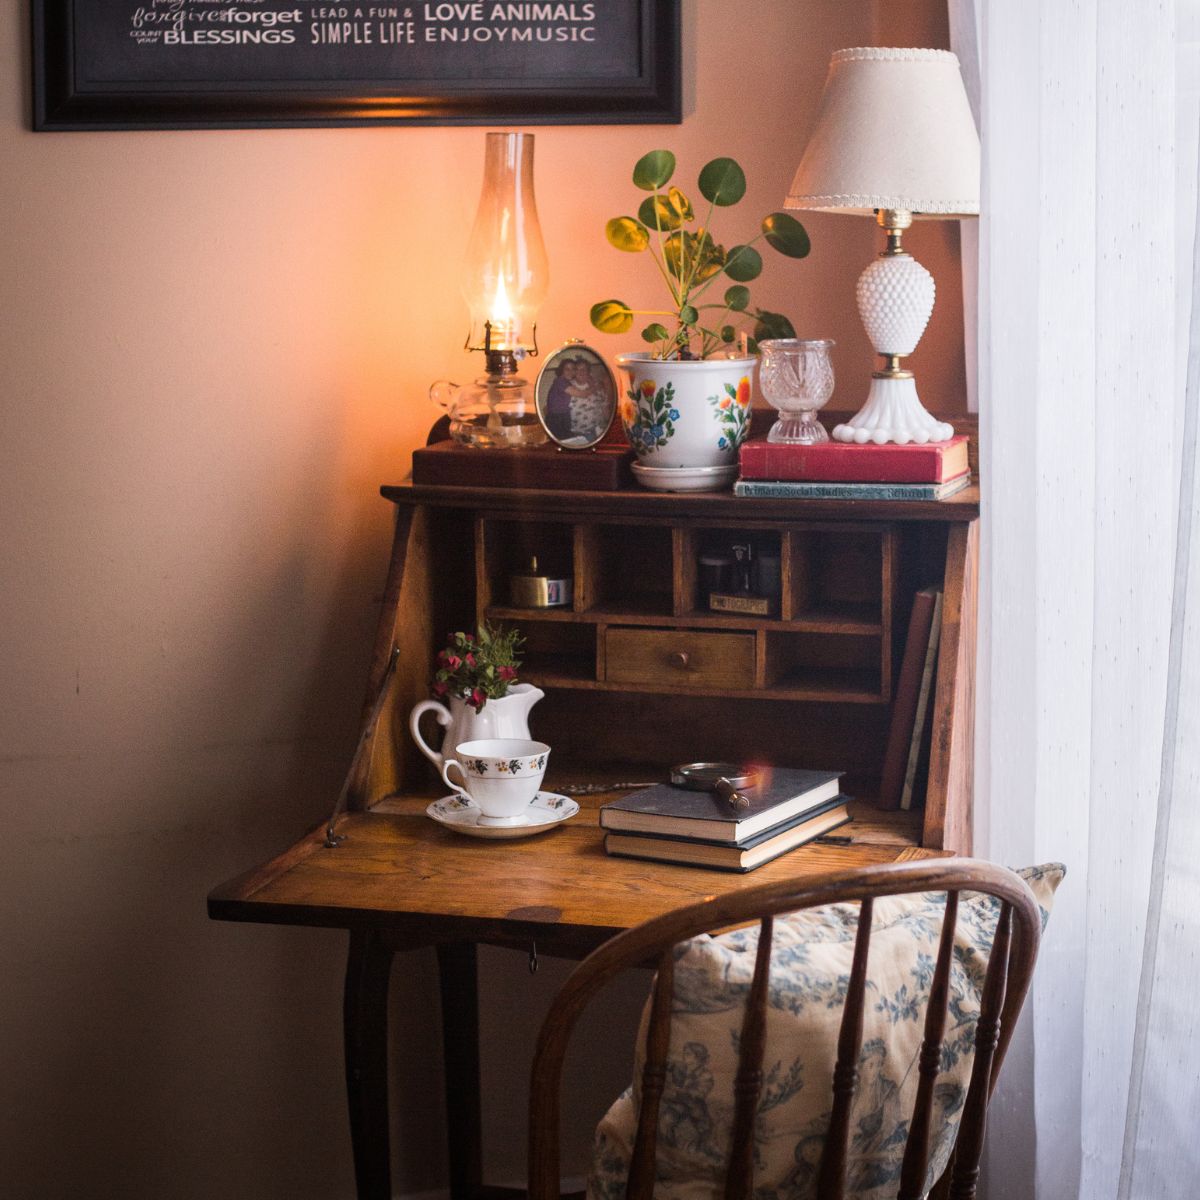 A antique secretary desk in the corner of the room decorated with an oil lamp, small gold photo frame, a houseplant, and two old books with a candle holder & a milkglass lamp. Inside the desk has 2 books with a magnifying glass on top, next th that is a vintage tea cup & saucer & a ironstone creamer with a dried bouquet of mini roses. Above the desk is a black & white print with last name surrounded with family rules.